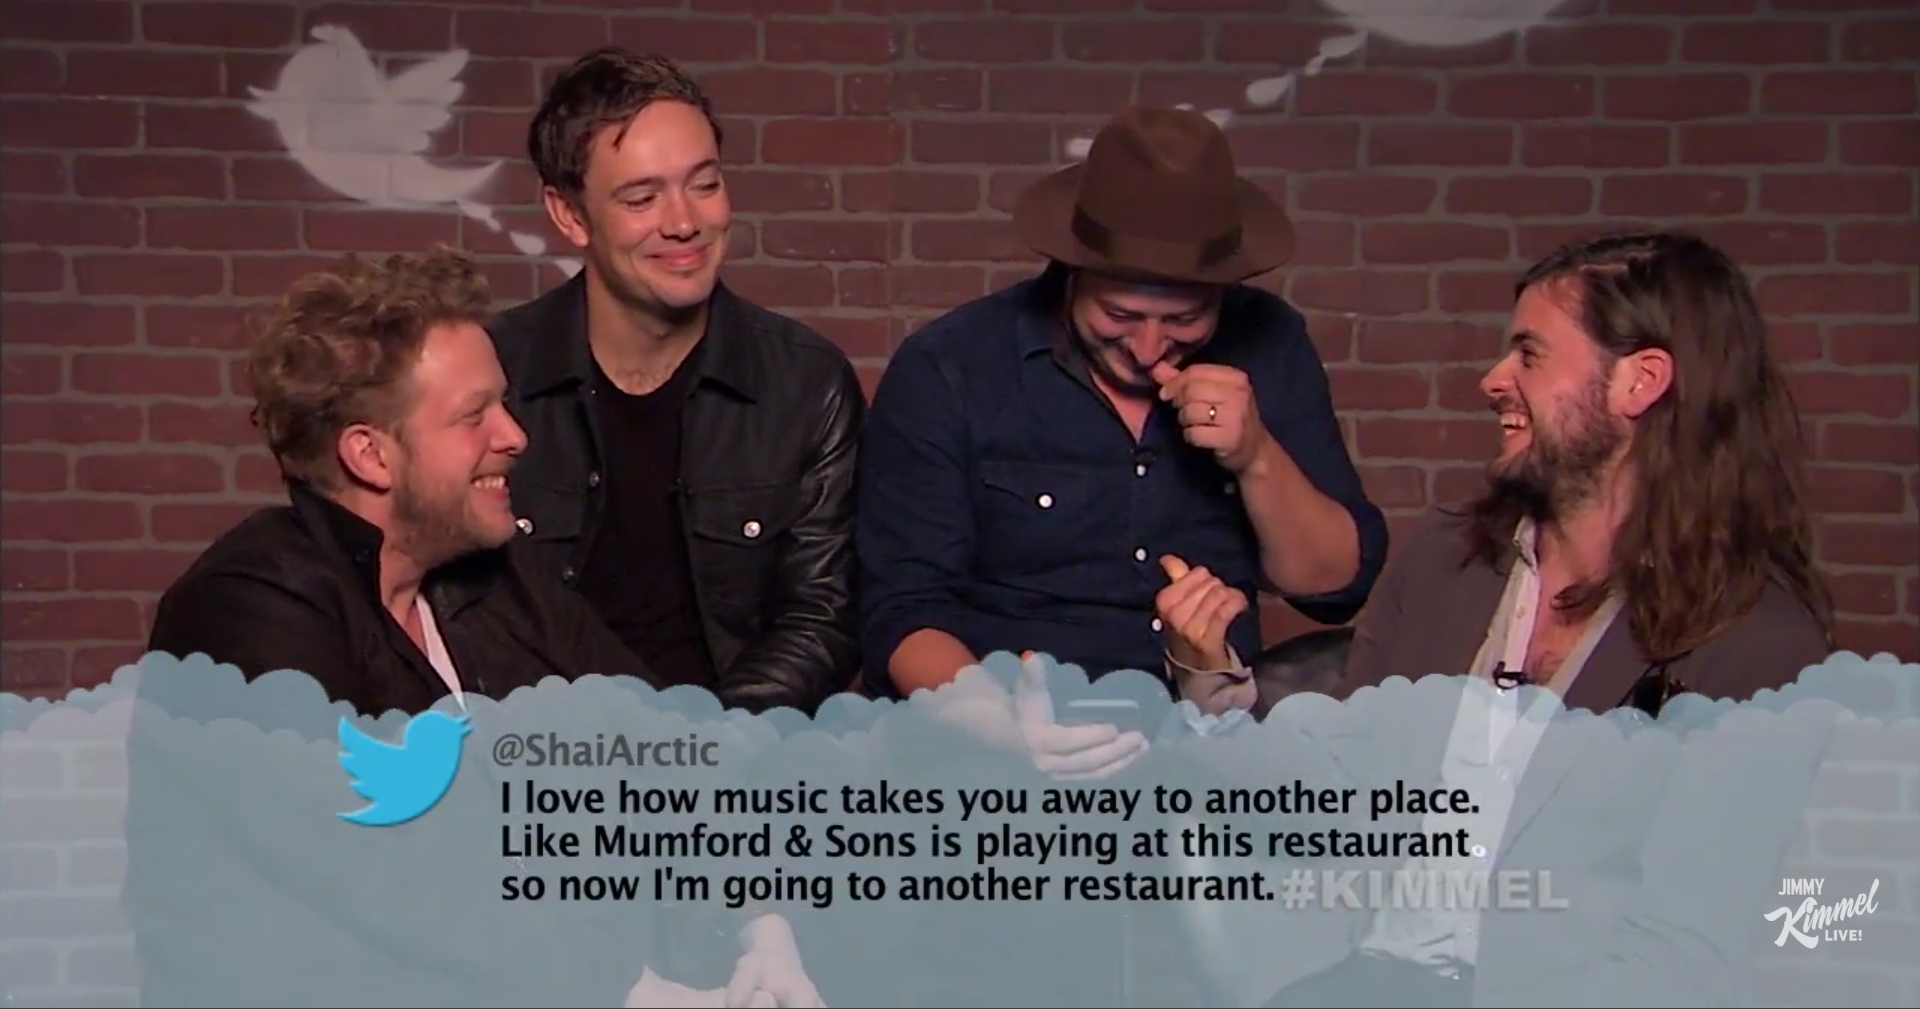 mumford and sons mean tweets - I love how music takes you away to another place. Mumford & Sons is playing at this restaurant so now I'm going to another restaurant. Kinin El Kimmel